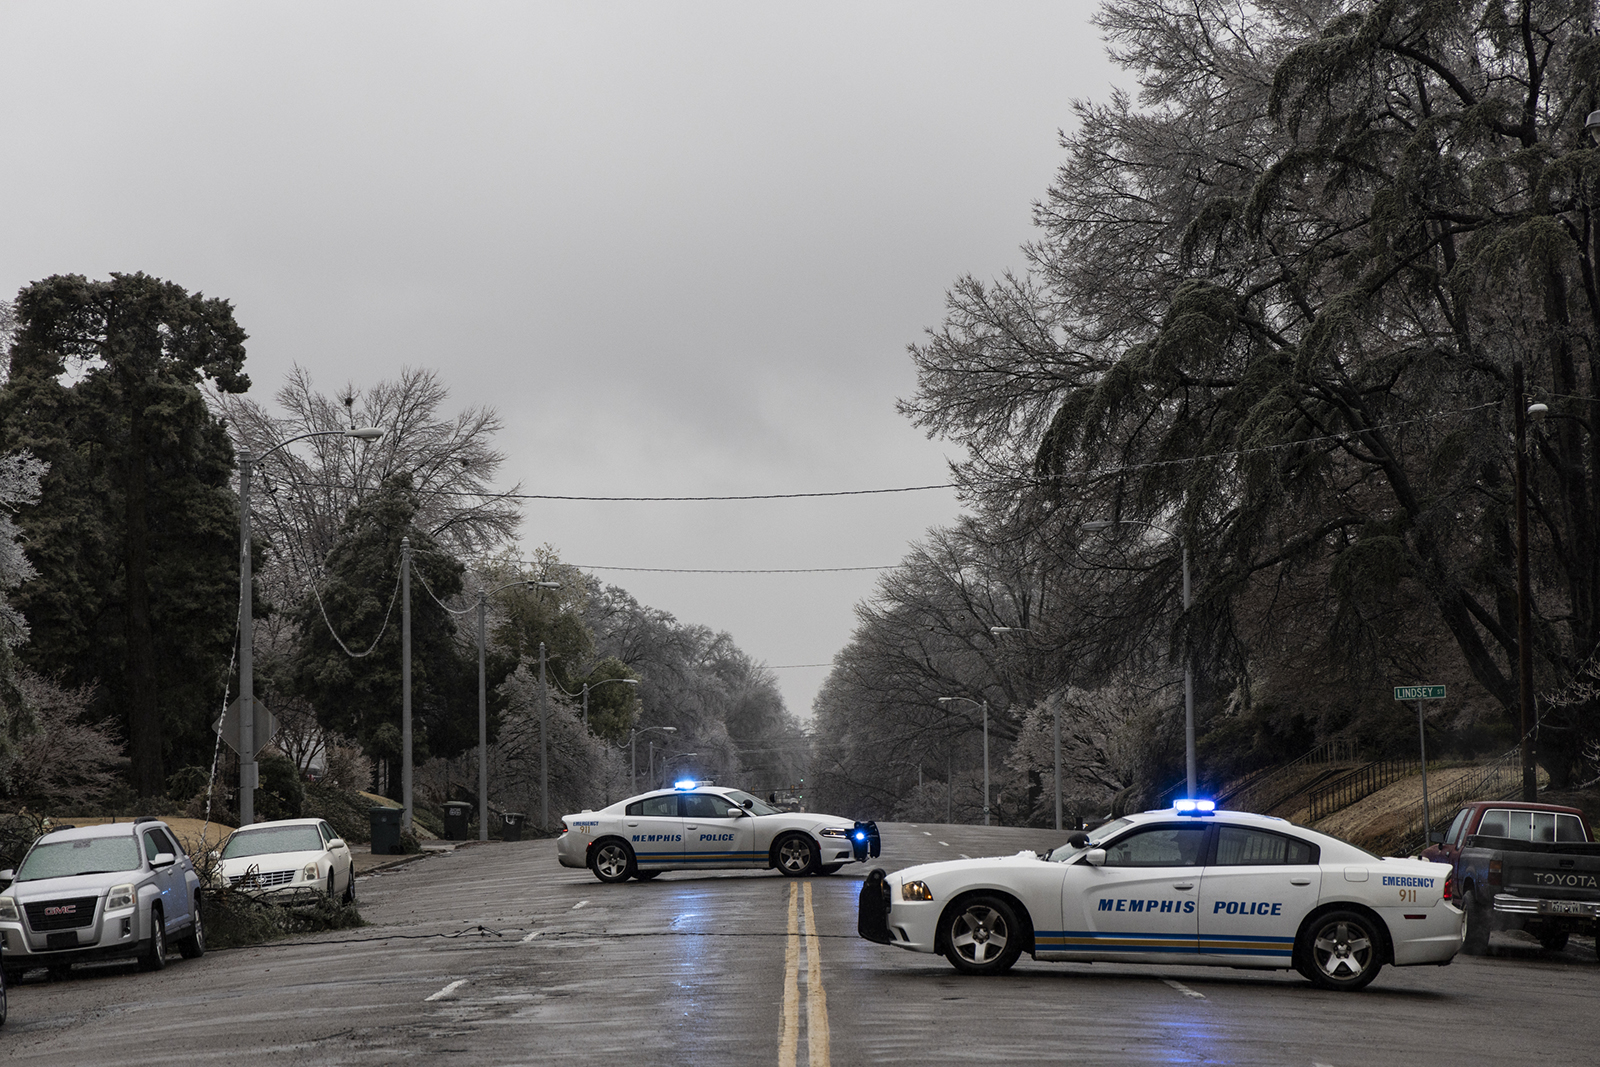 Memphis police officers block off Central Ave. where a power line was downed across the road on Thursday in Memphis, Tennessee. 